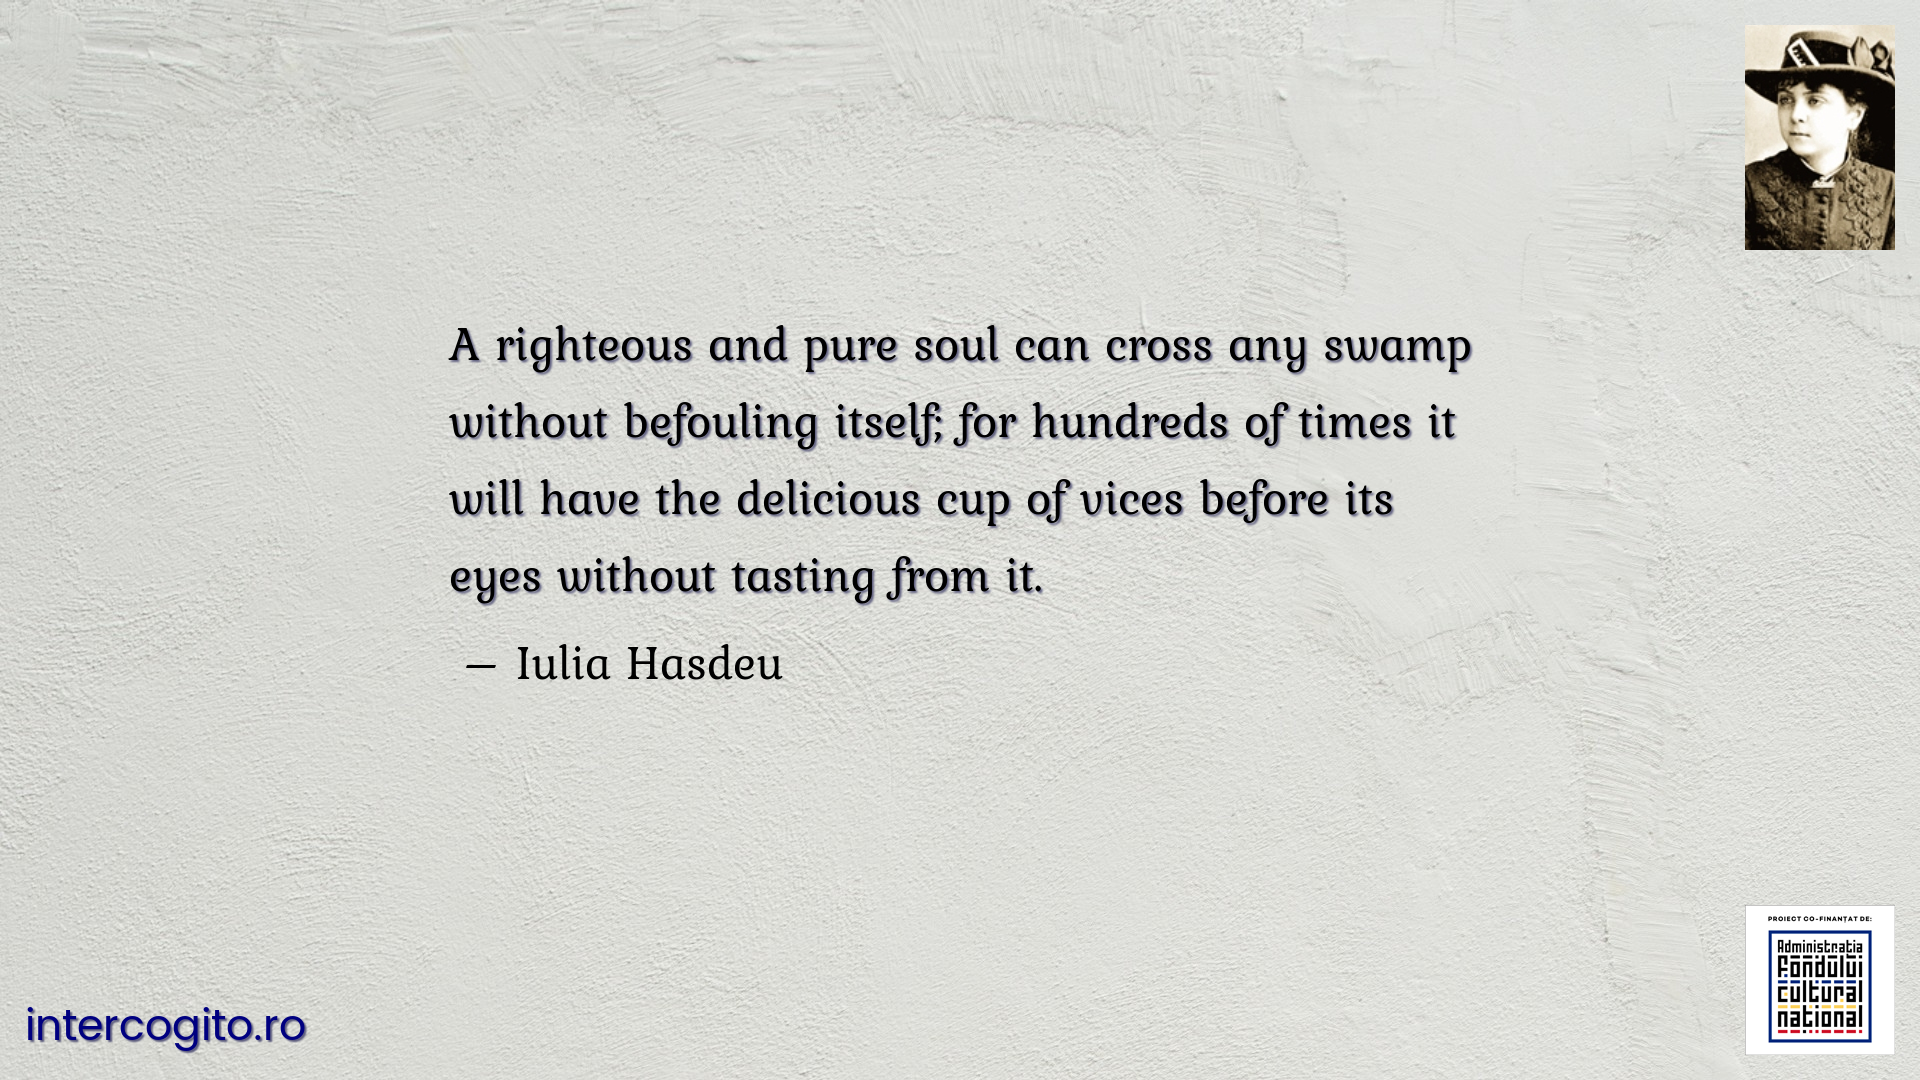 A righteous and pure soul can cross any swamp without befouling itself; for hundreds of times it will have the delicious cup of vices before its eyes without tasting from it.